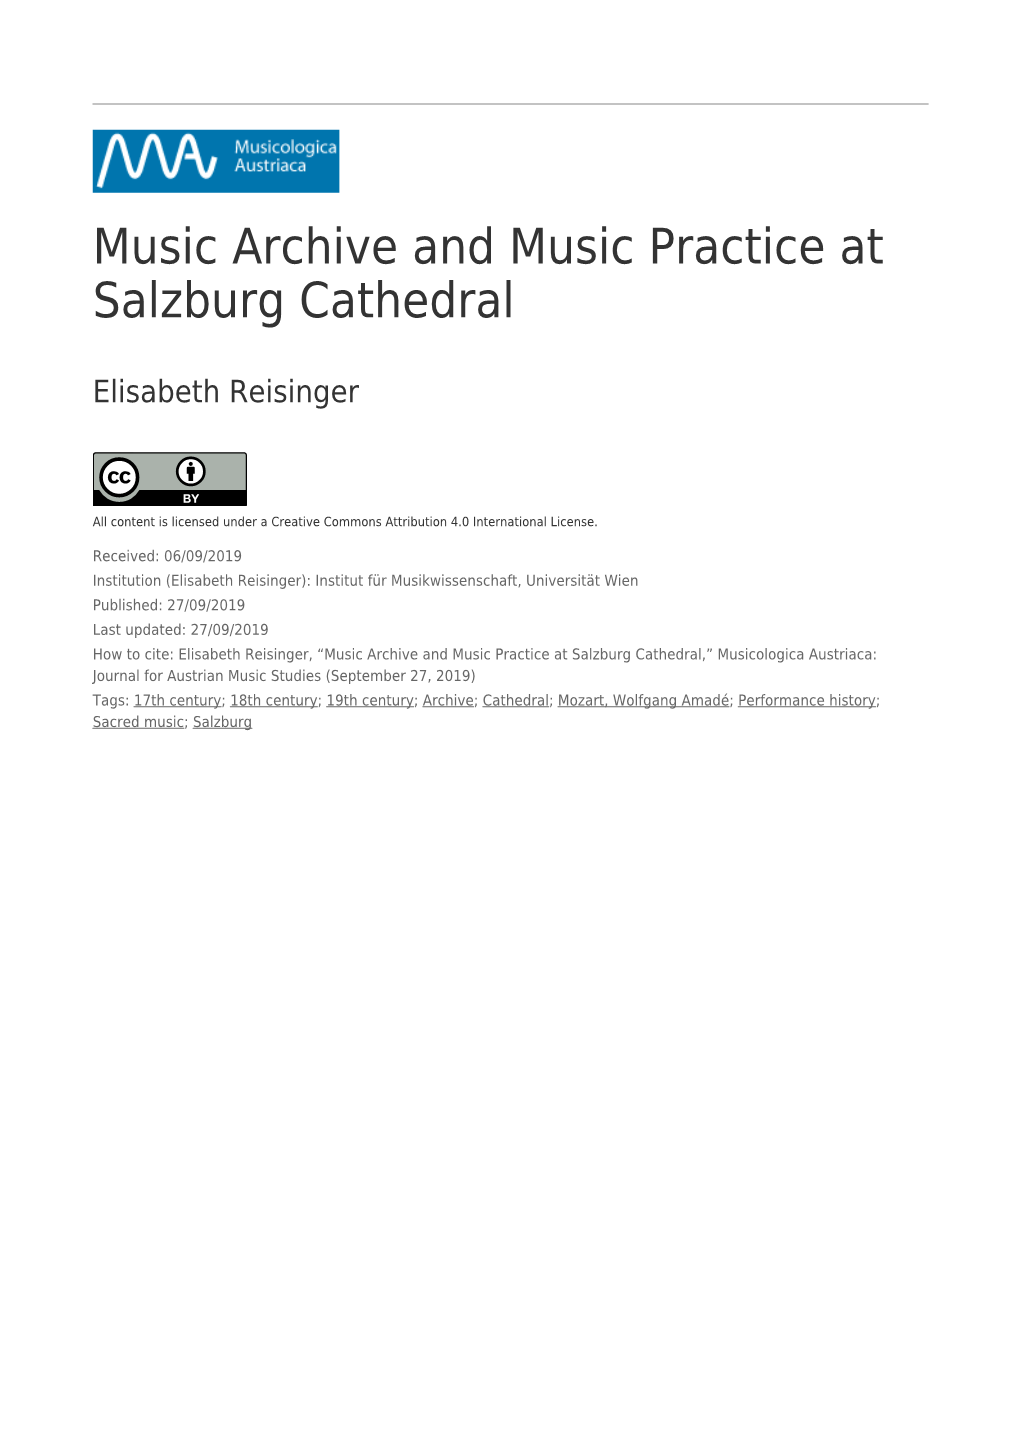 Music Archive and Music Practice at Salzburg Cathedral